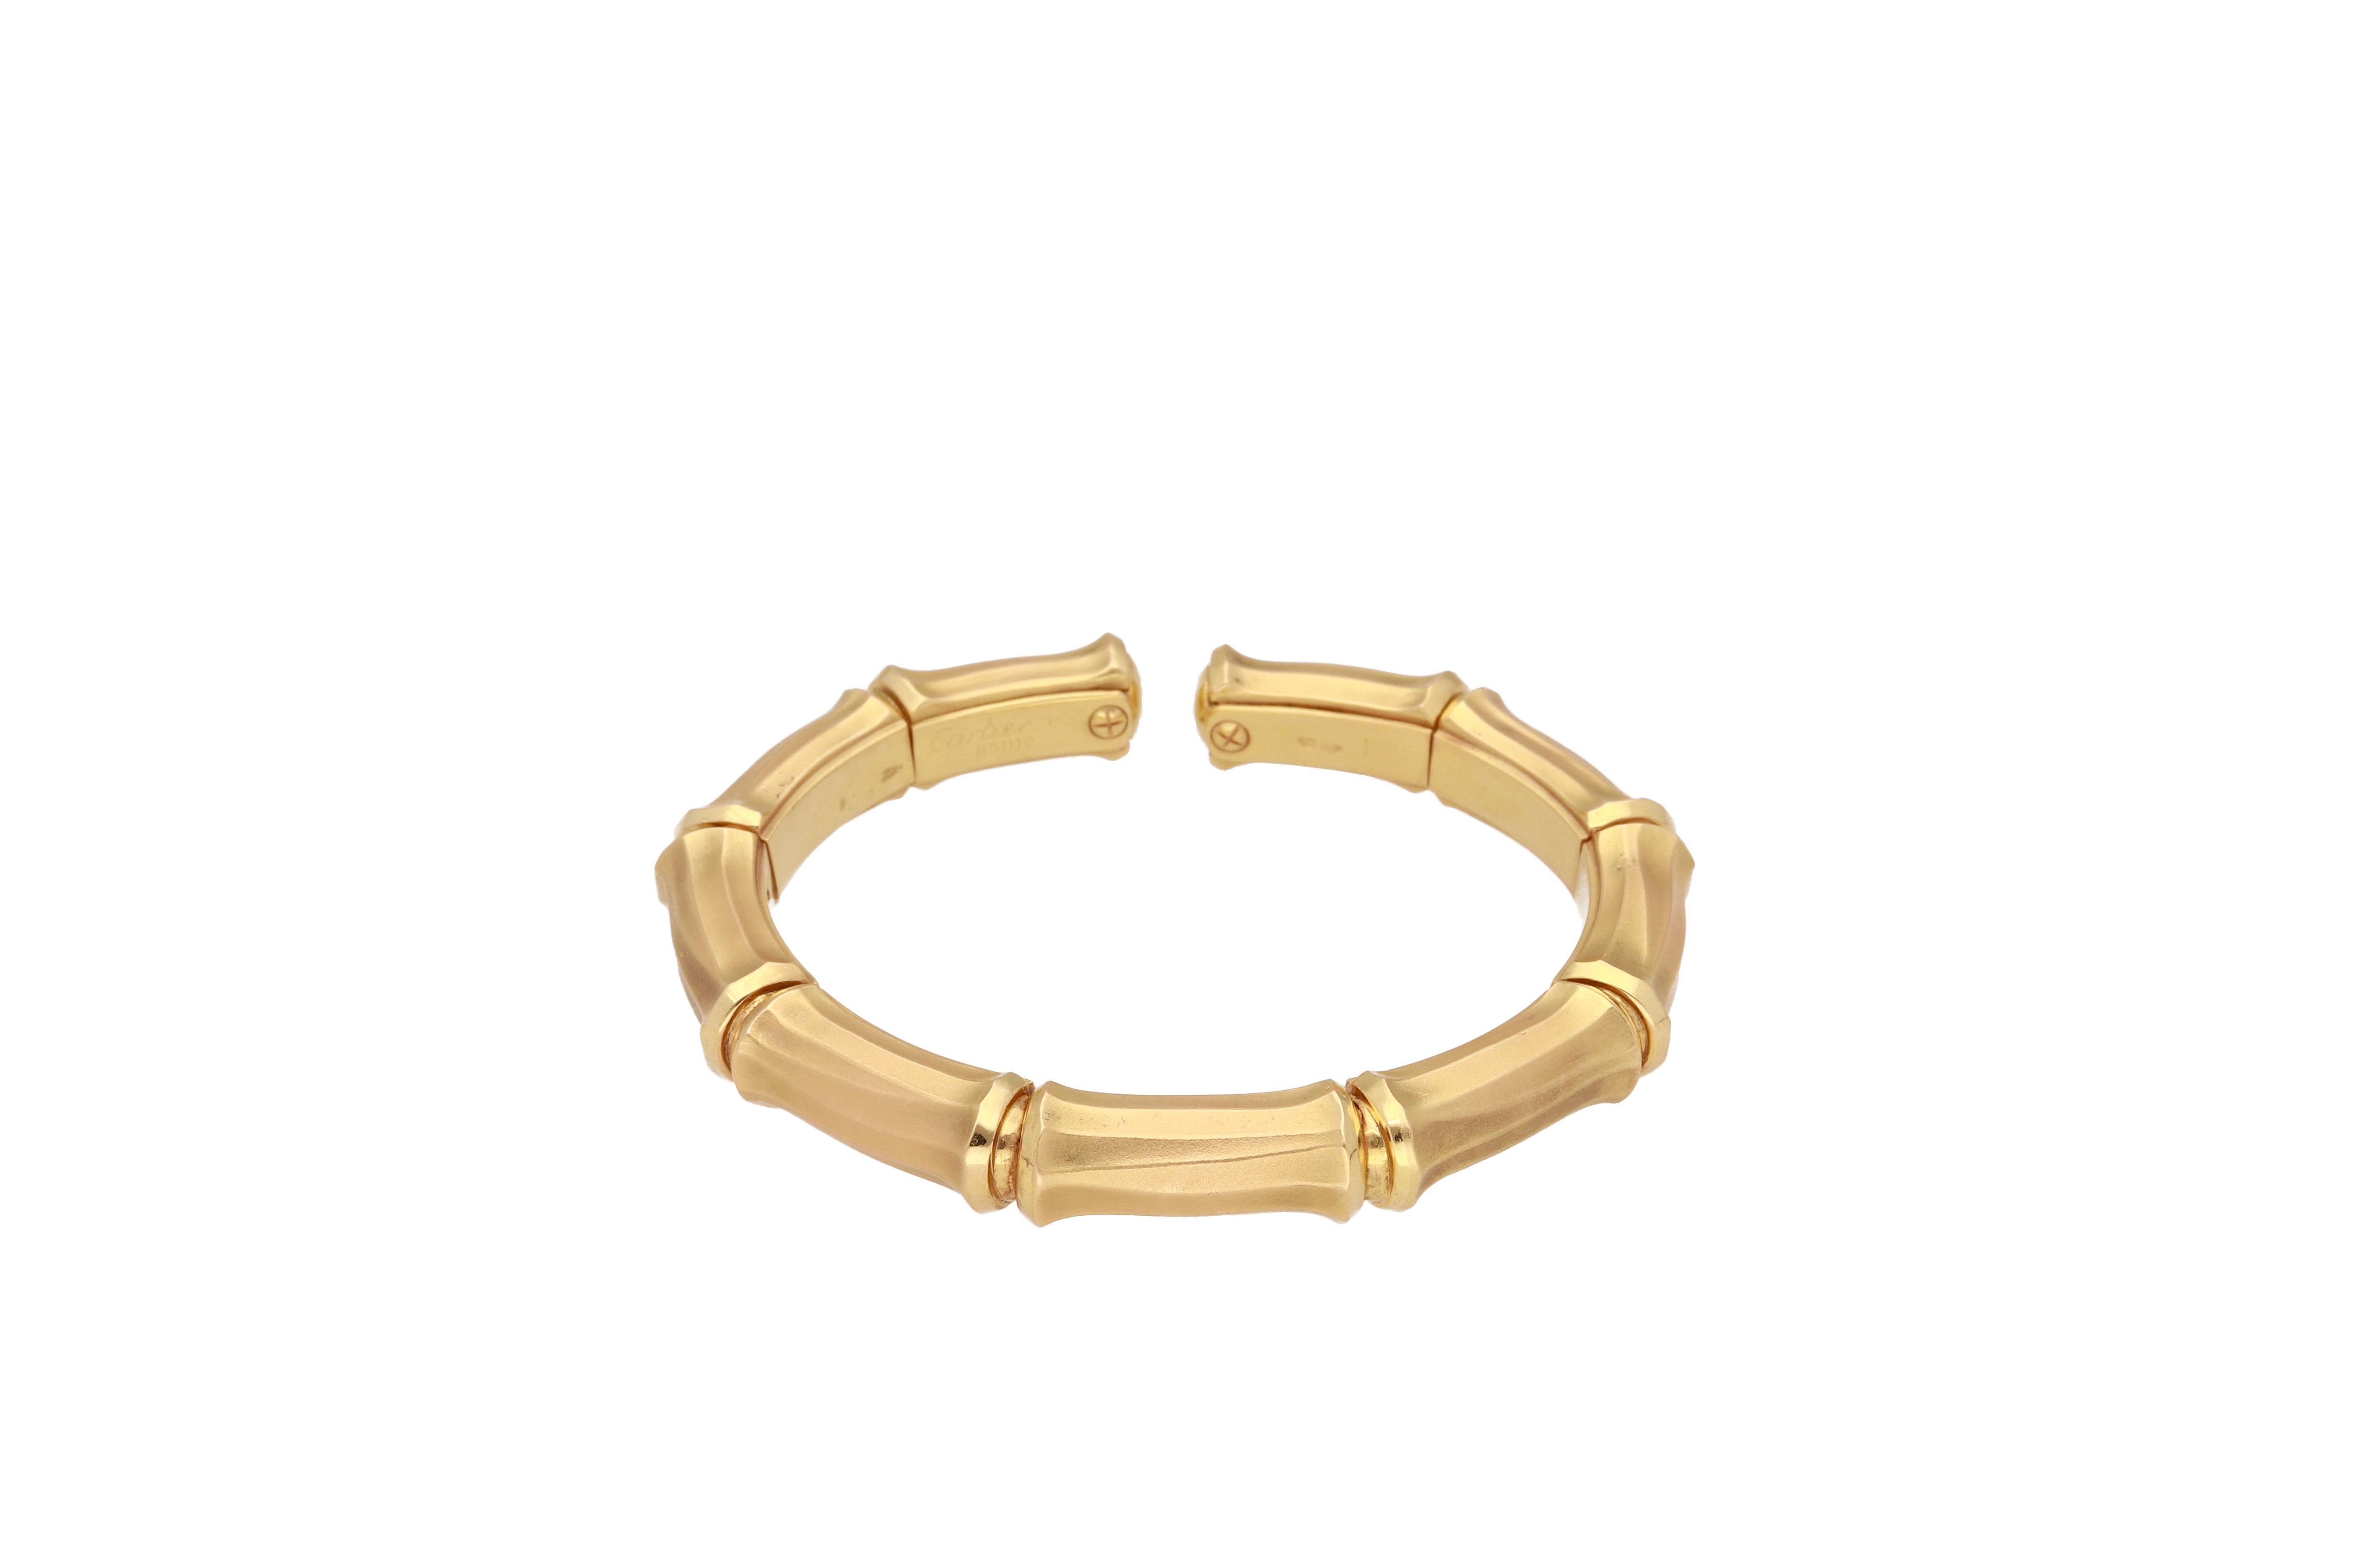 18 kt. yellow gold cuff bangle bracelet signed Cartier.
This classic cuff bangle is from 1980, formed by nine sections.
Is flexible and it can fit different sizes.
Signed and numbered.